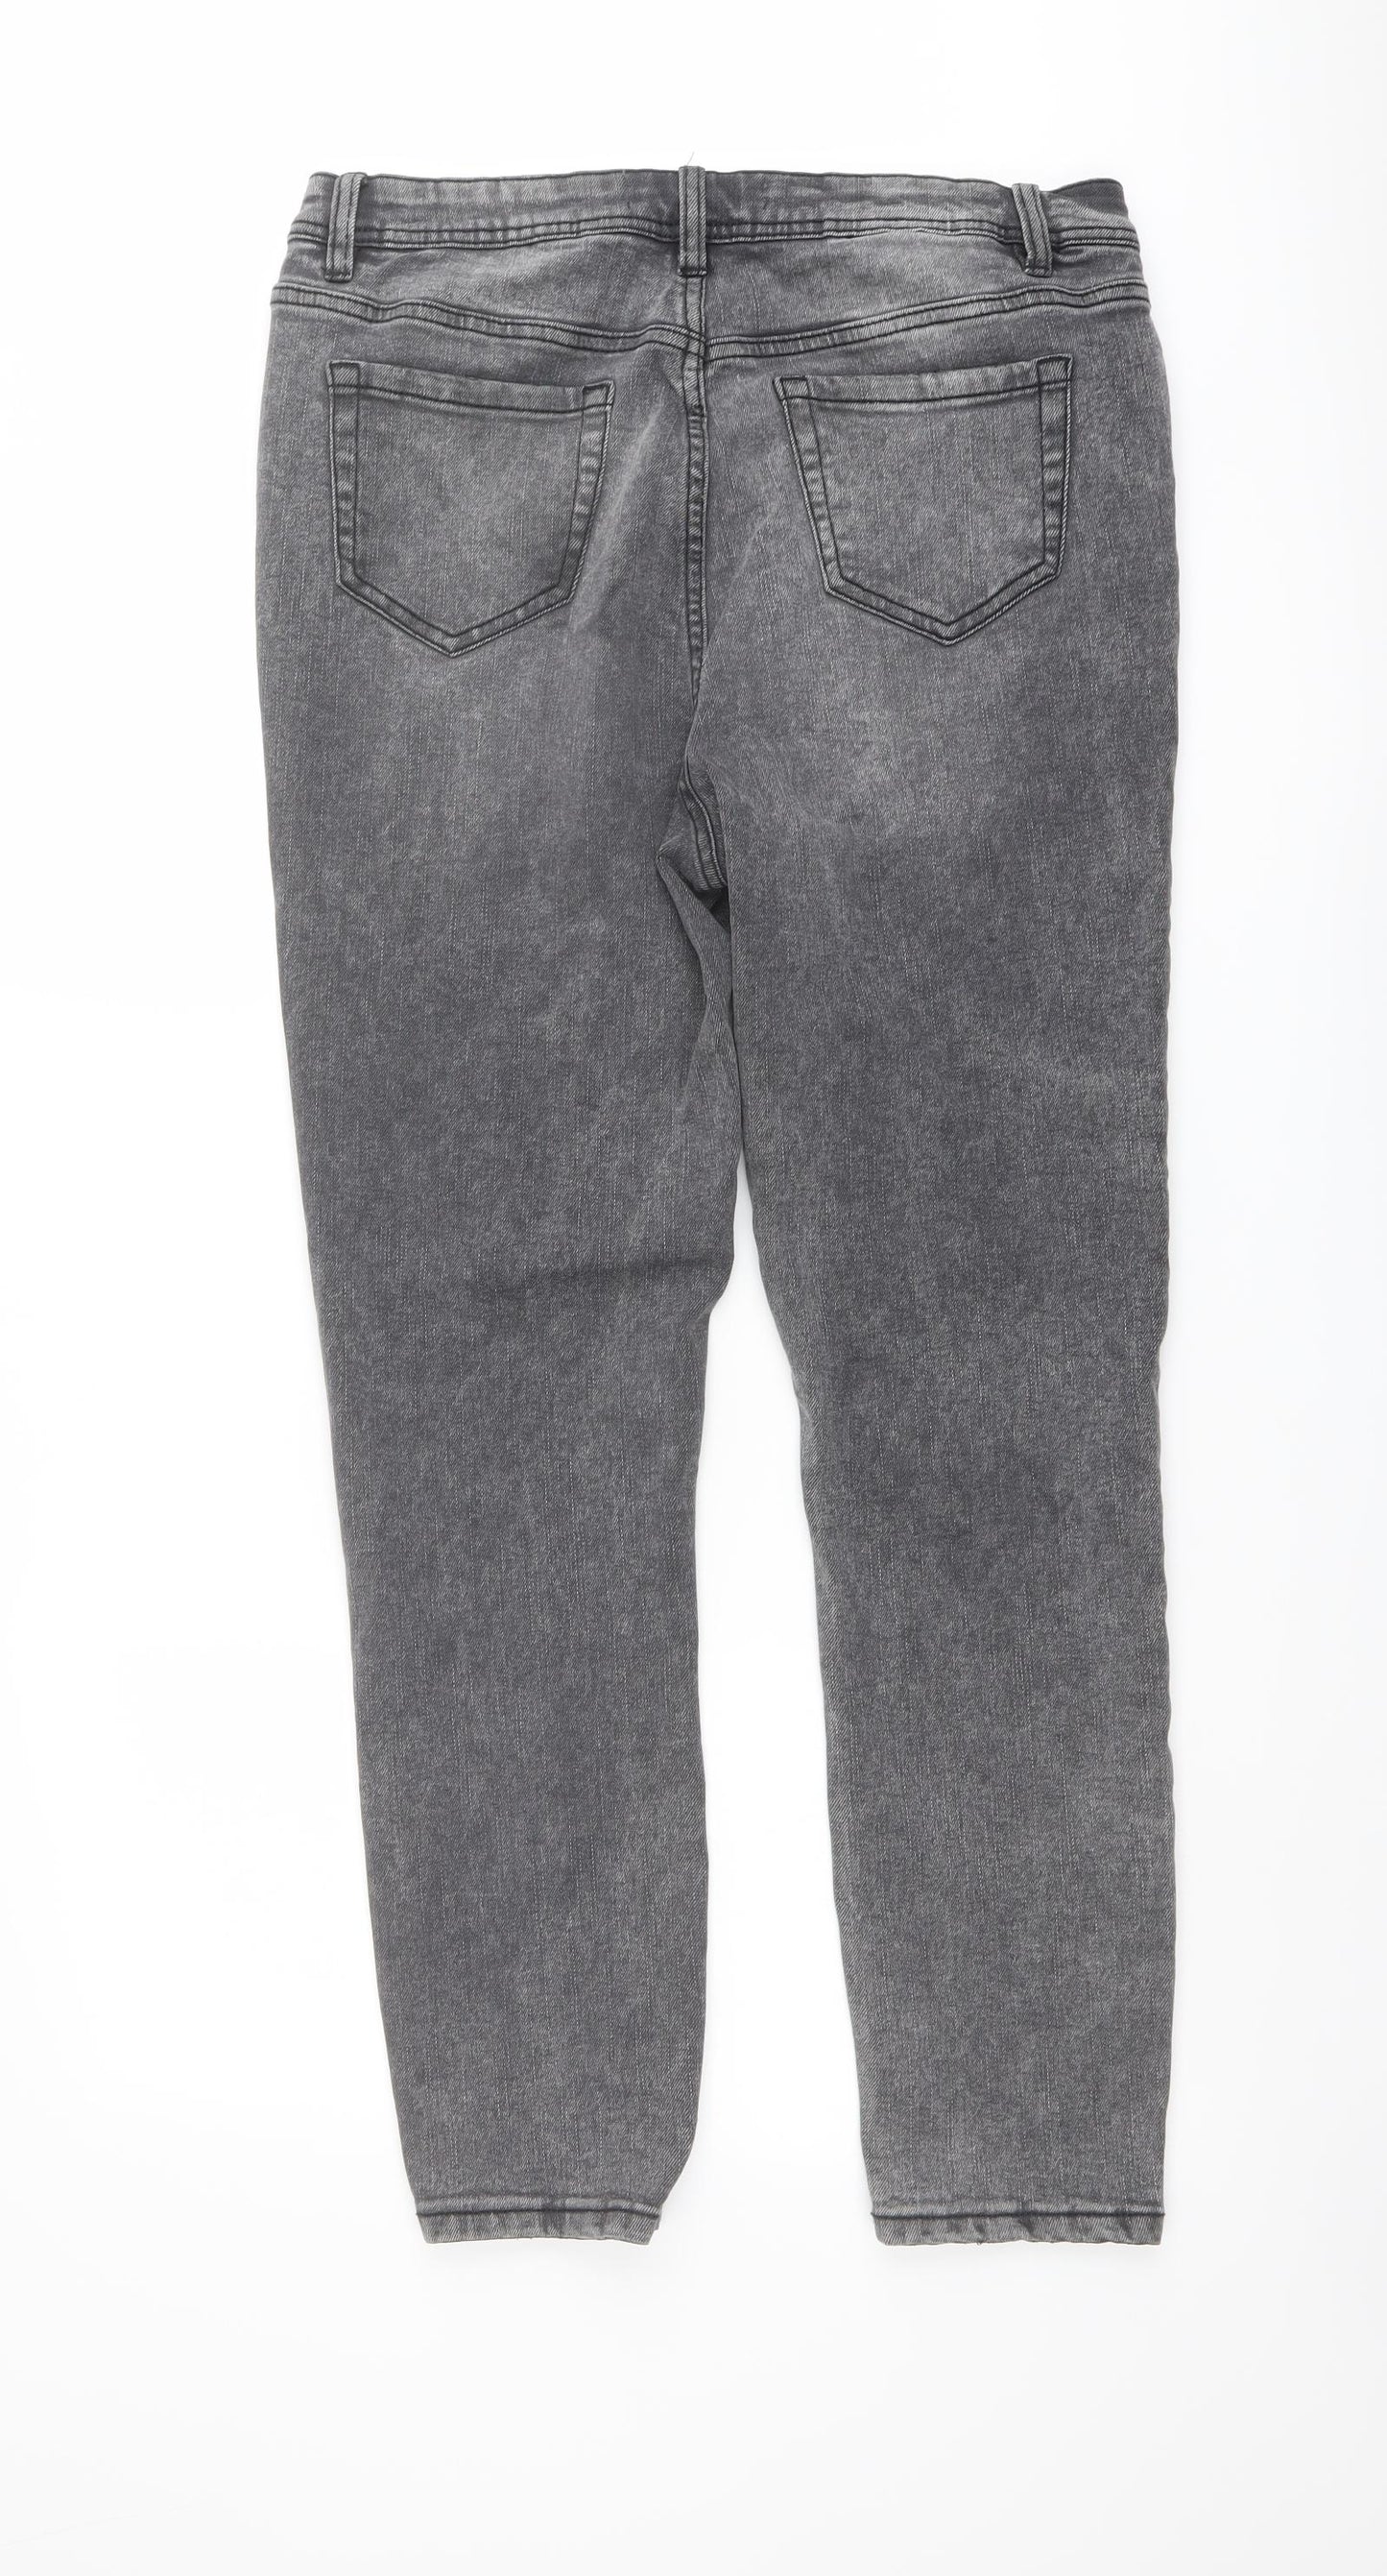 George Womens Grey Cotton Skinny Jeans Size 16 L28 in Regular Button